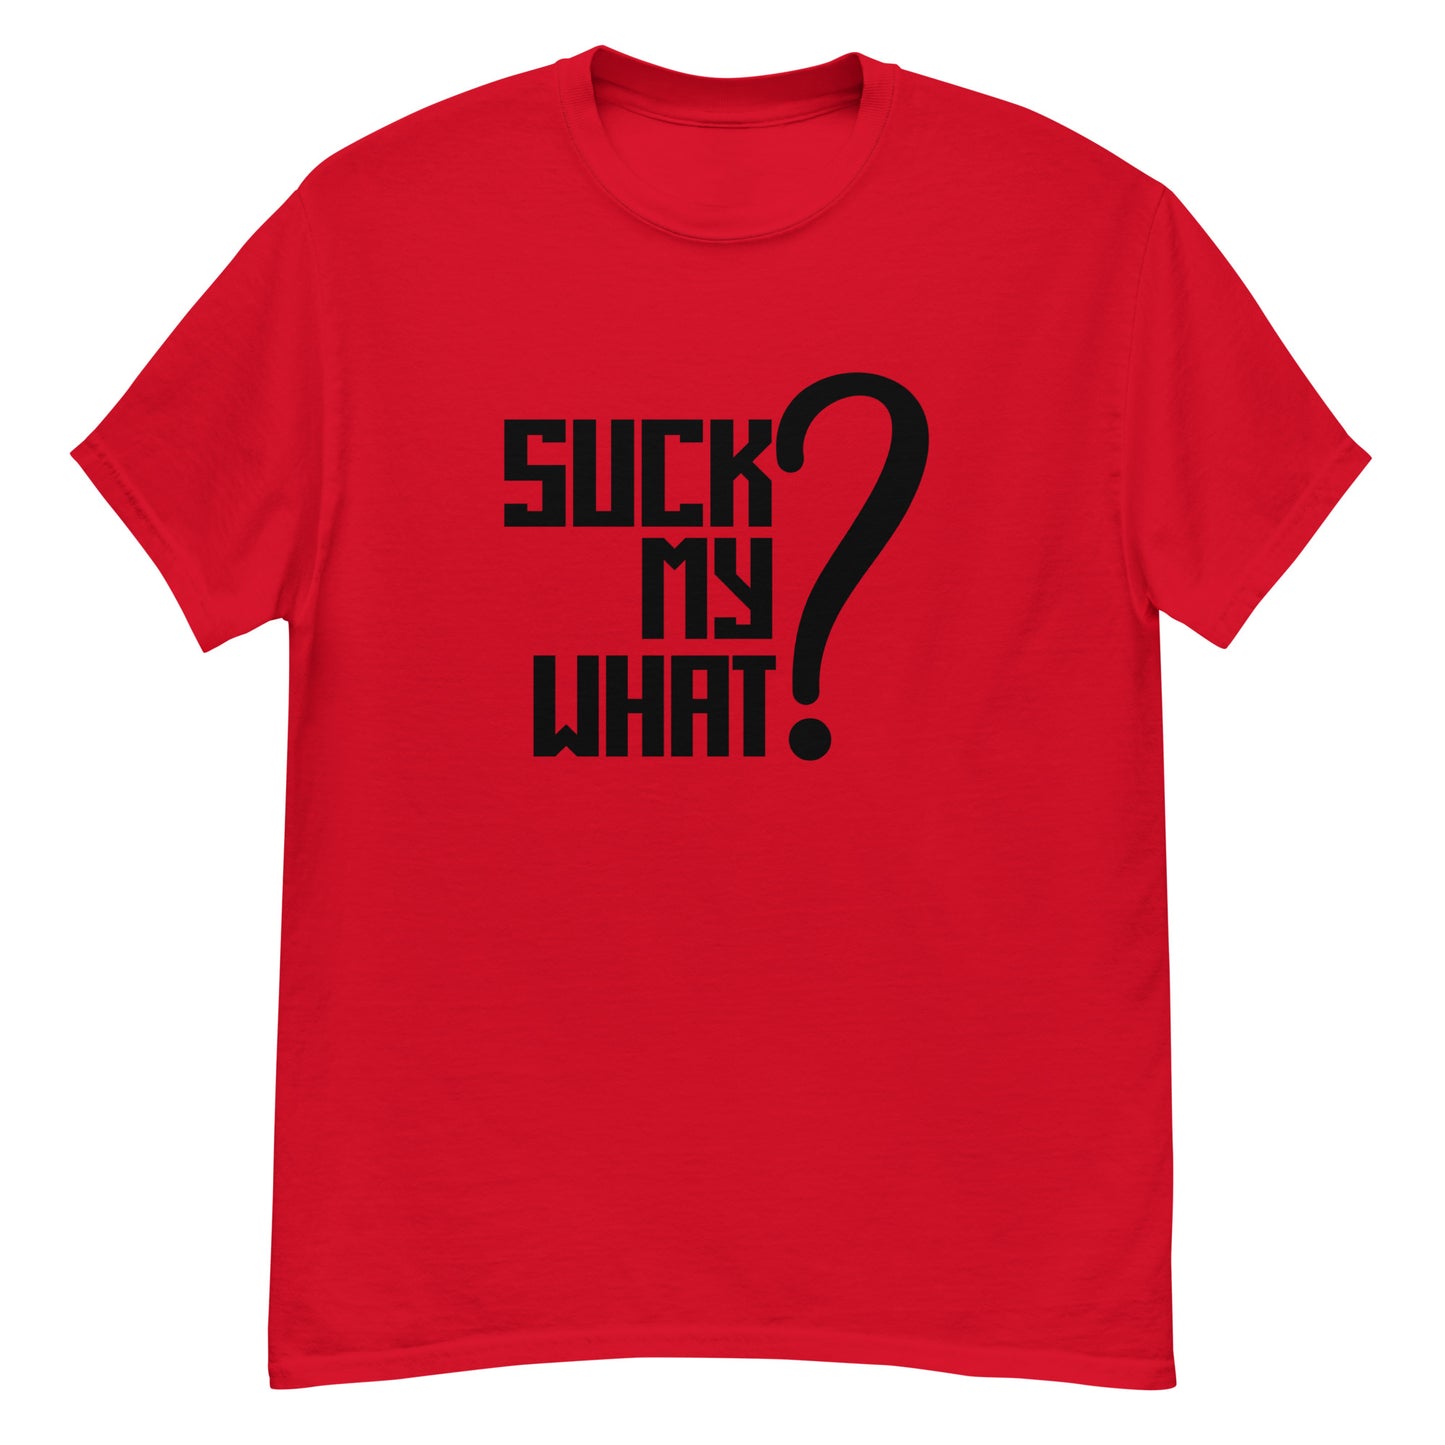 Suck My What? Center Stack Feels Men's Classic Tee (Blk Graphic)